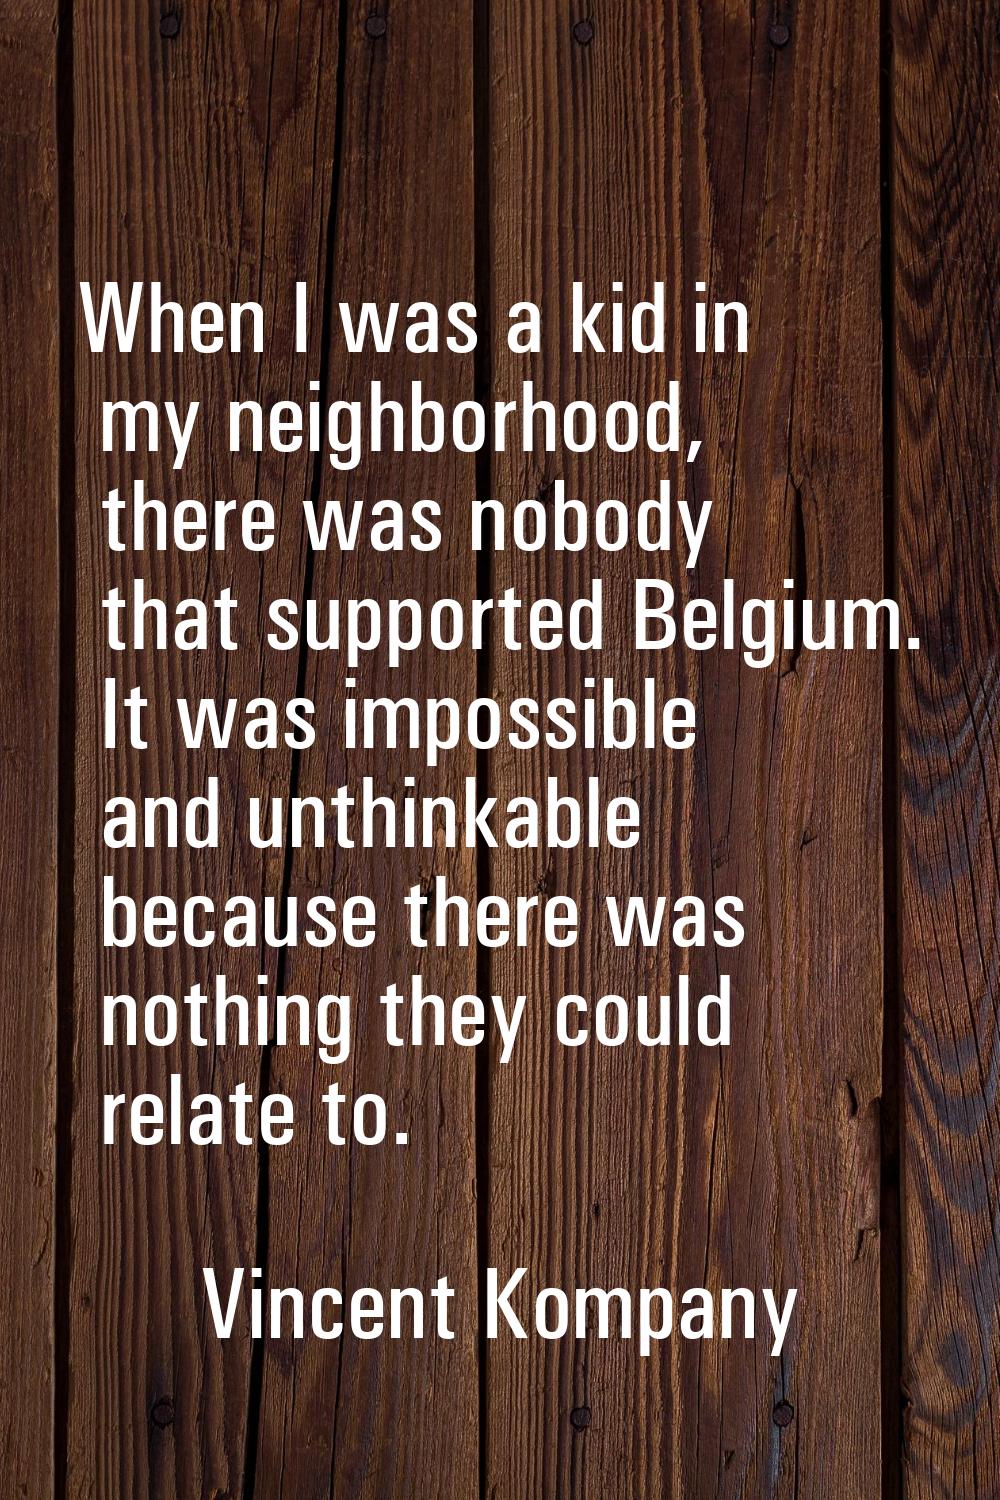 When I was a kid in my neighborhood, there was nobody that supported Belgium. It was impossible and